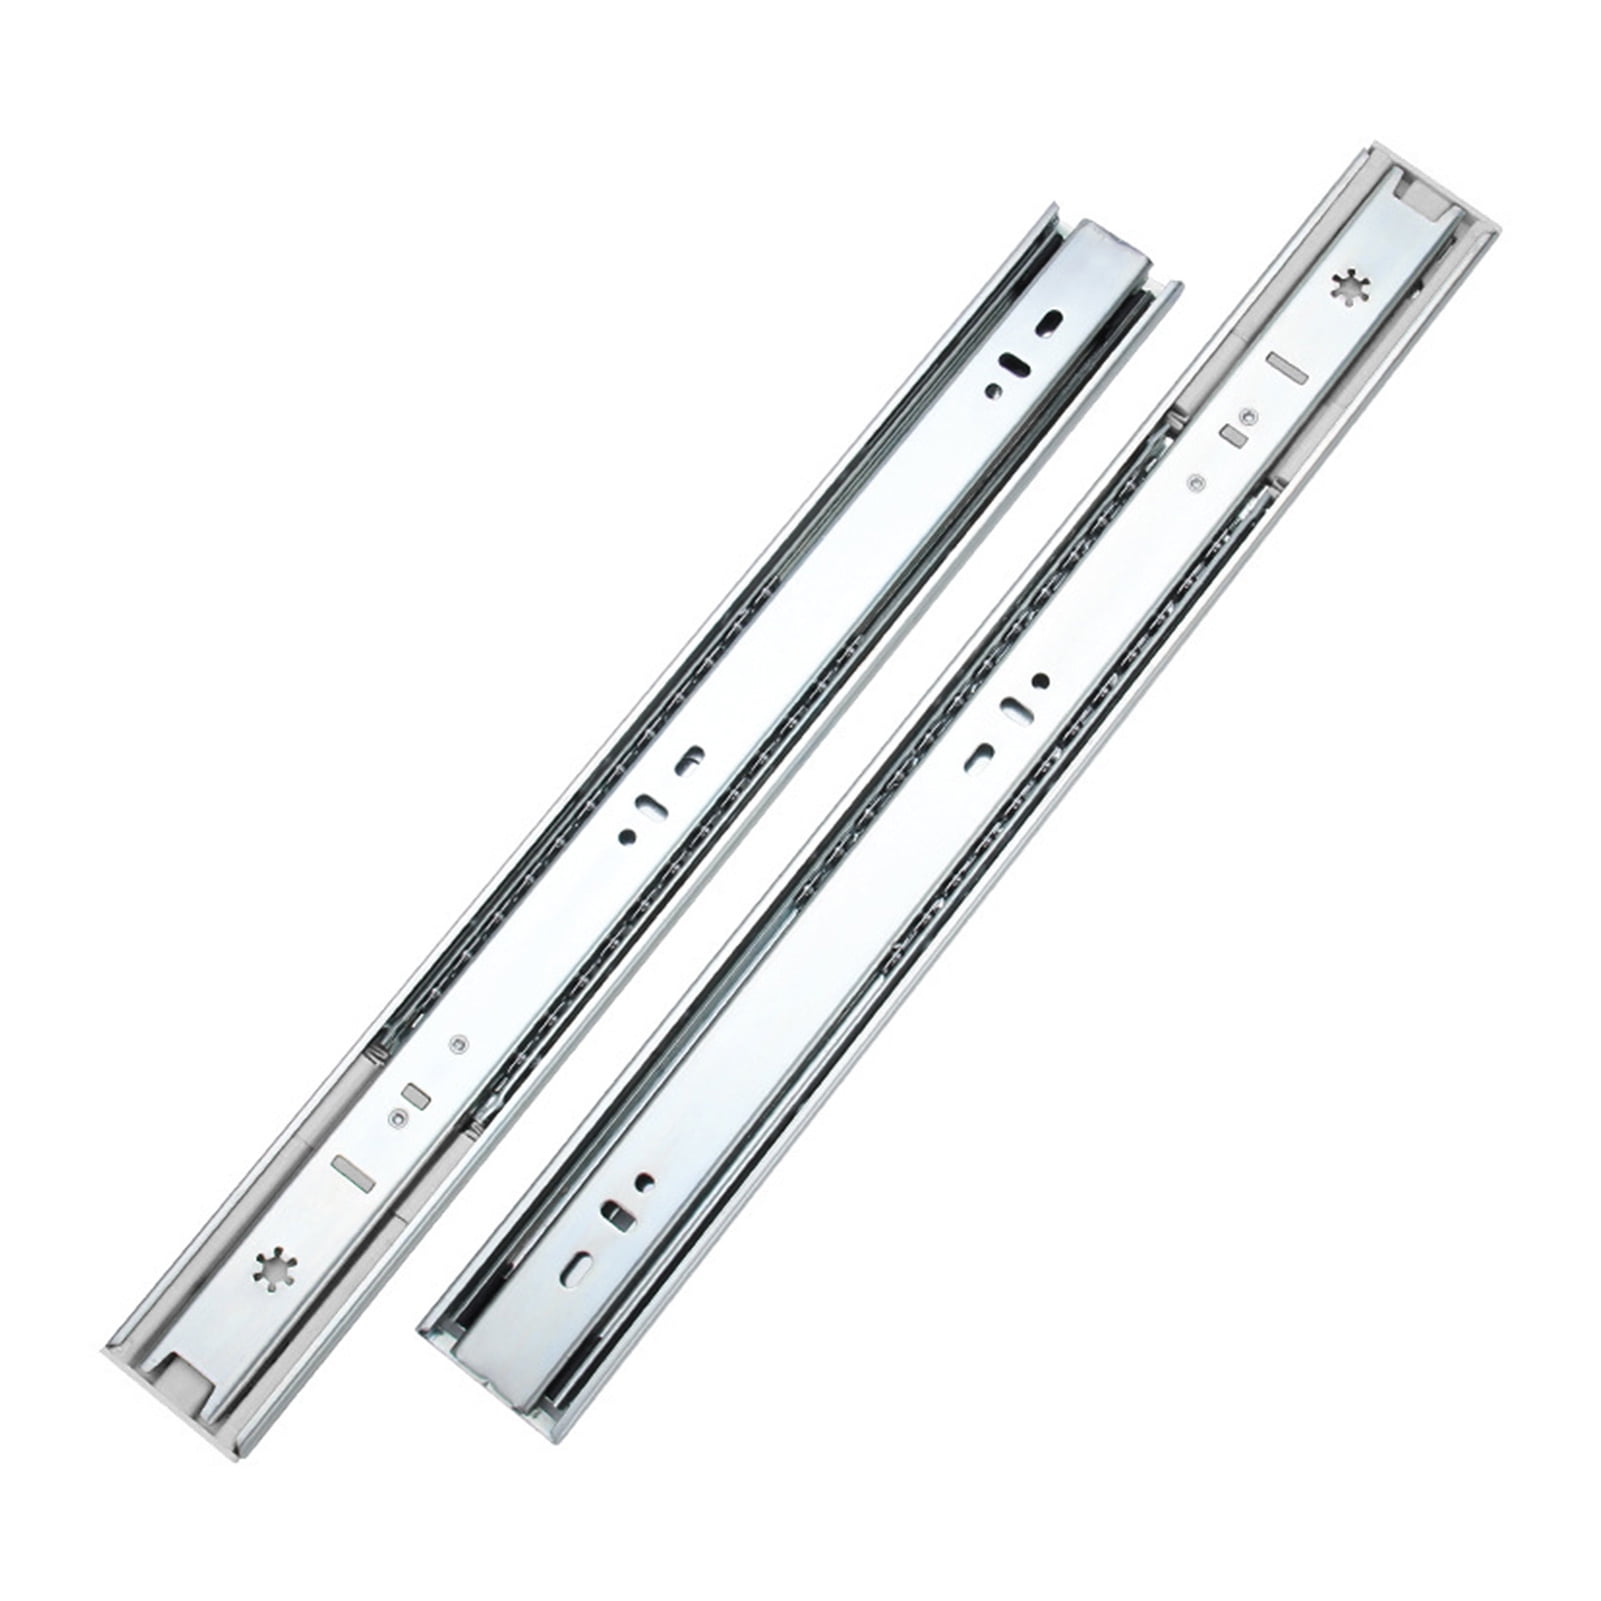 12/14/16/18/20/22inch 1 Pair Steel Push to Open Side Mount Drawer Slide Rails,3 Fully Extended Heavy Duty Ball Bearing Drawer Runners 